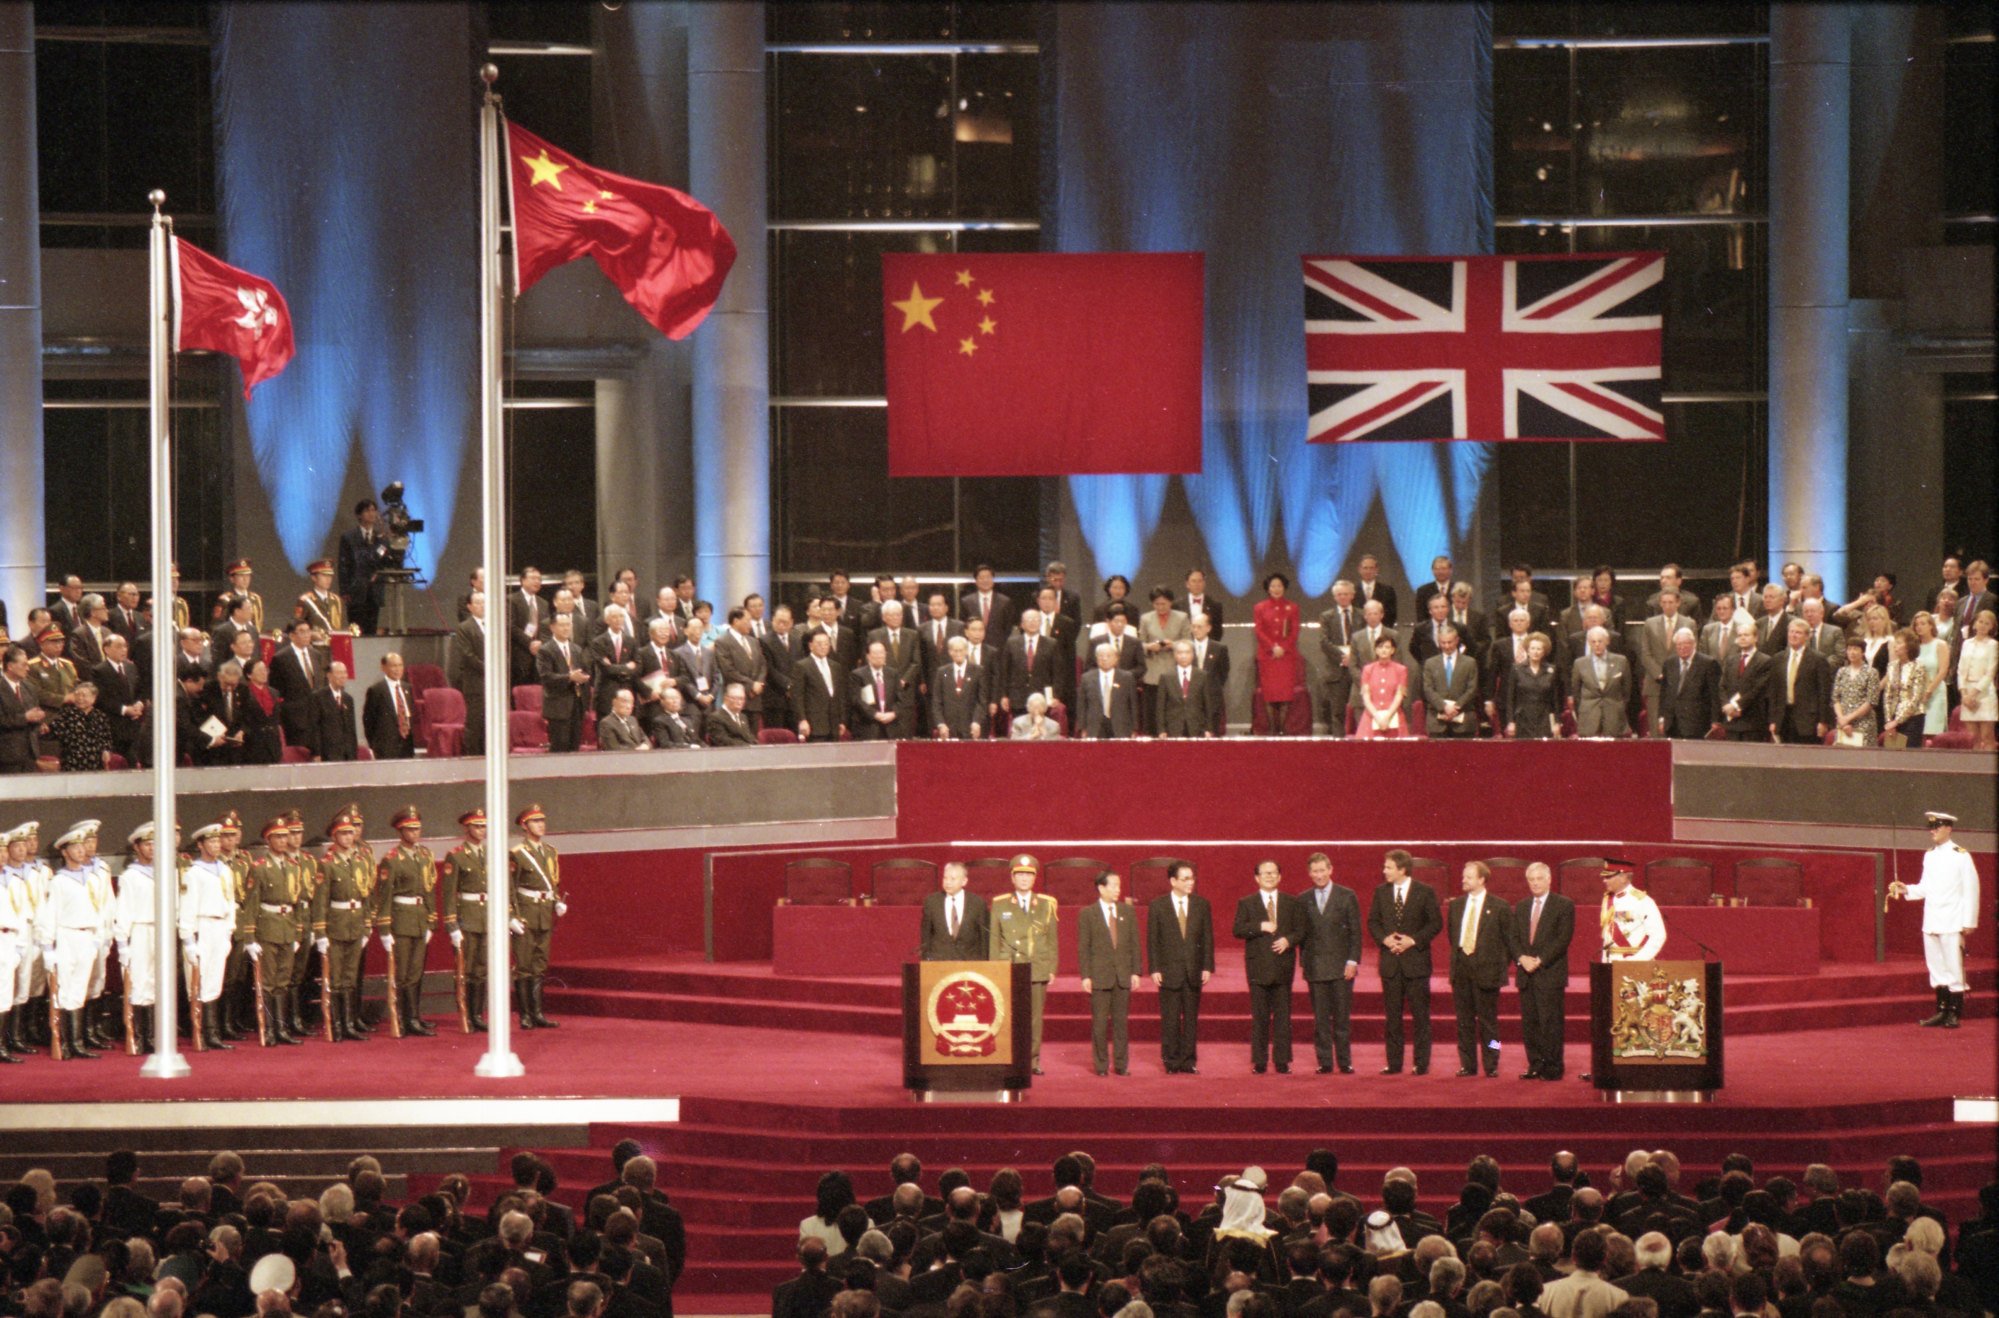 handover ceremony marking Hong Kong's return to Chinese sovereignty - EDGEPROP SINGAPORE 